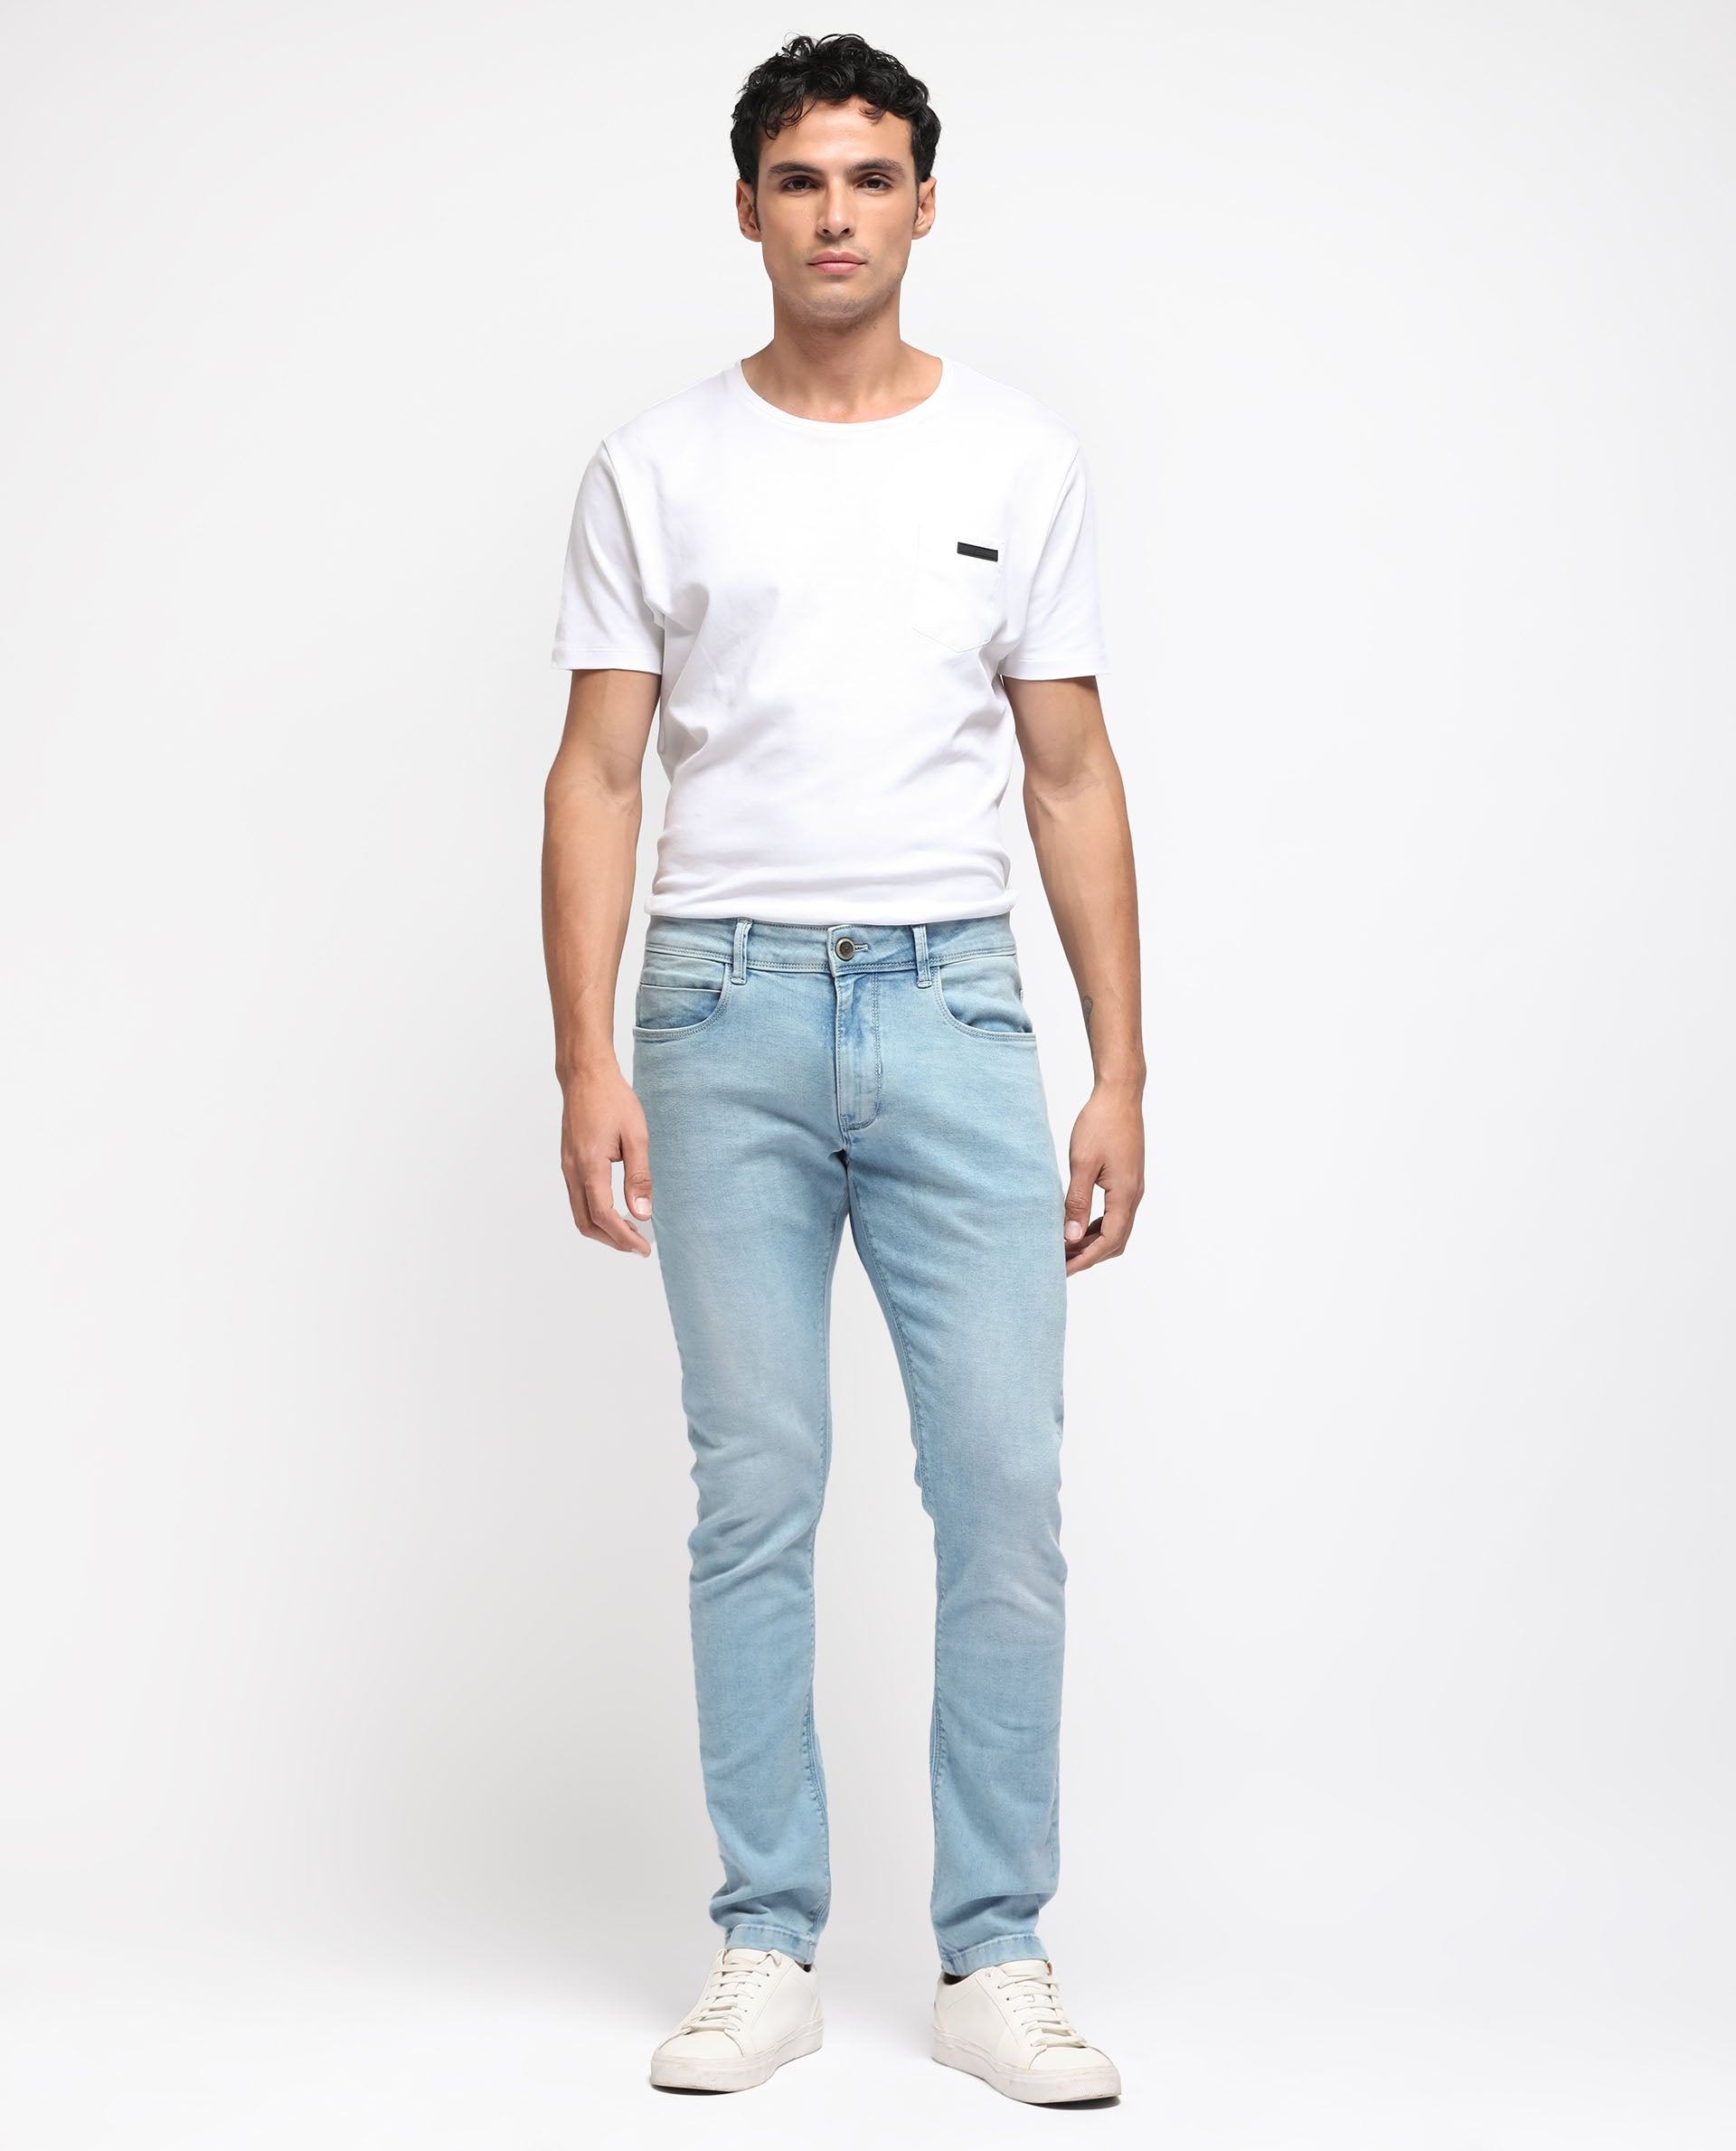 Aggregate 132+ ice blue jeans mens latest